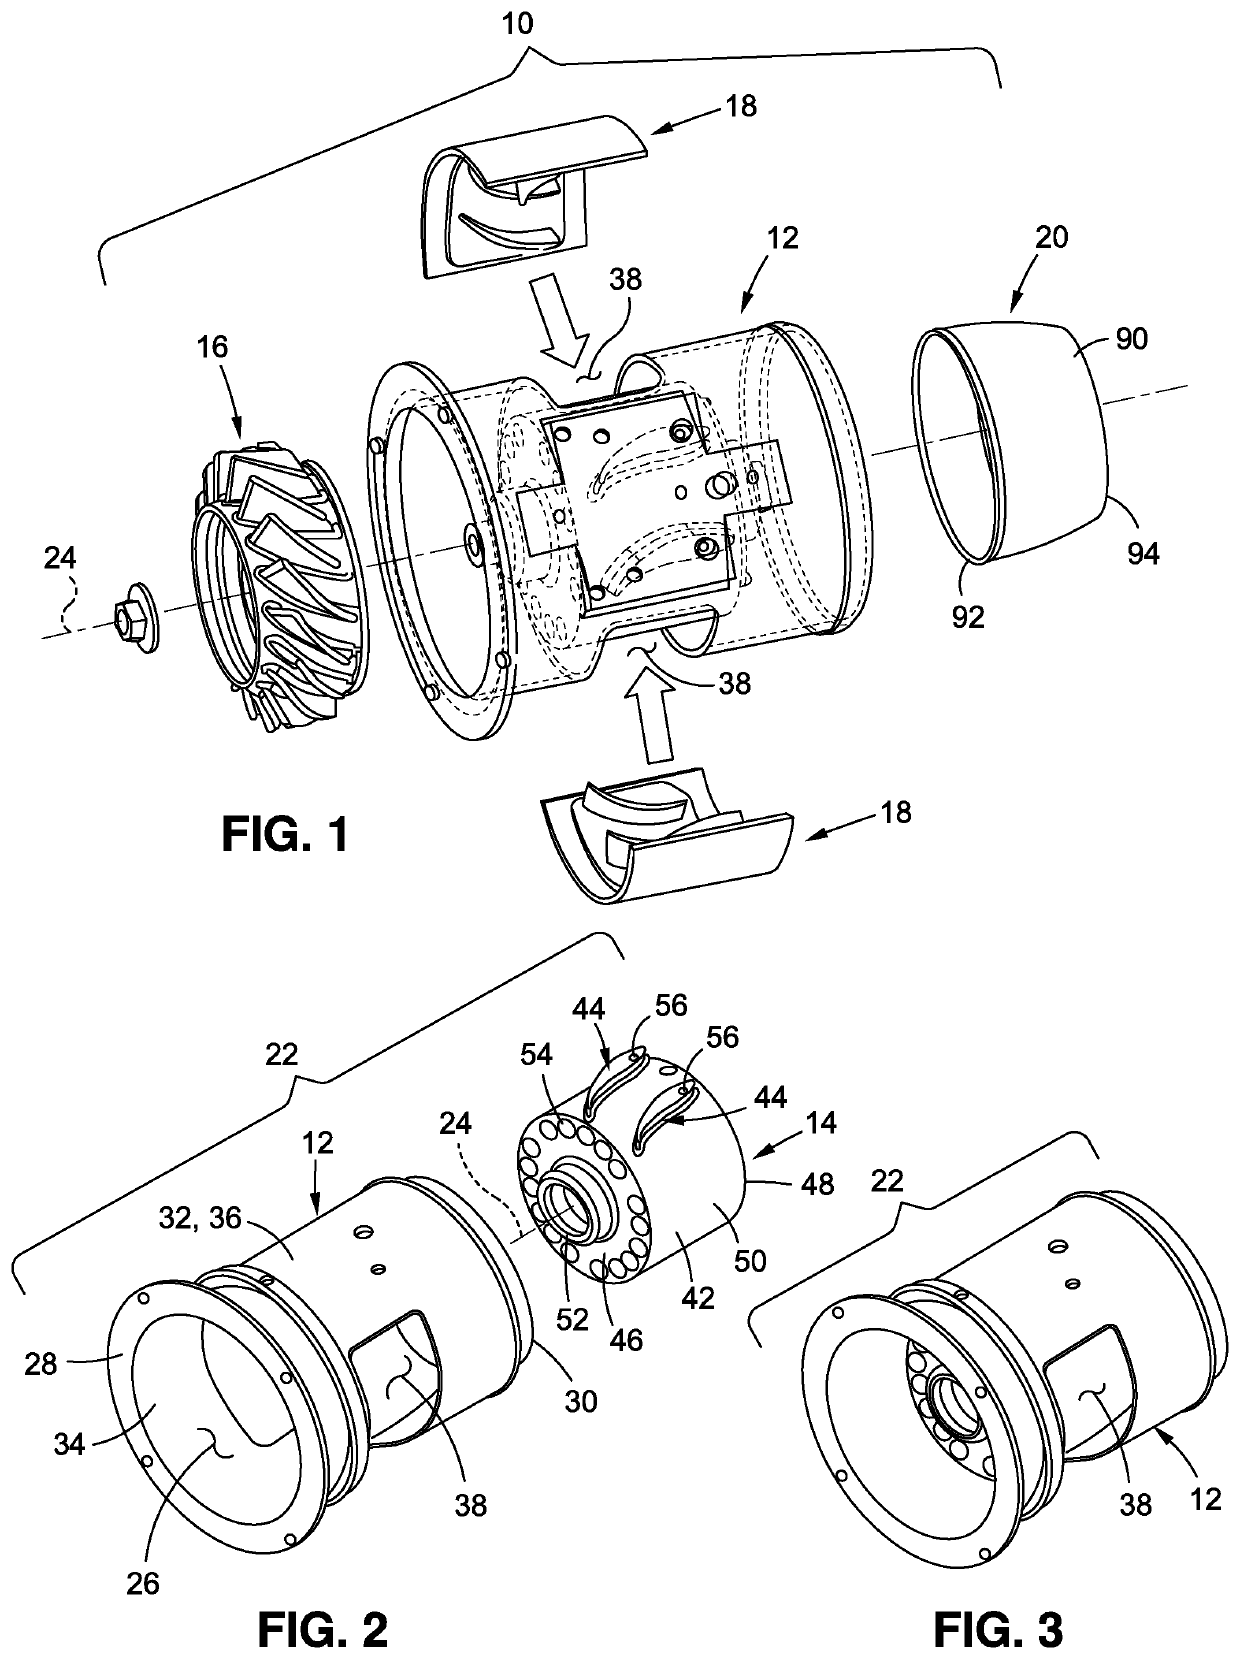 Apparatus and related method to vary fan performance by way of modular interchangeable parts